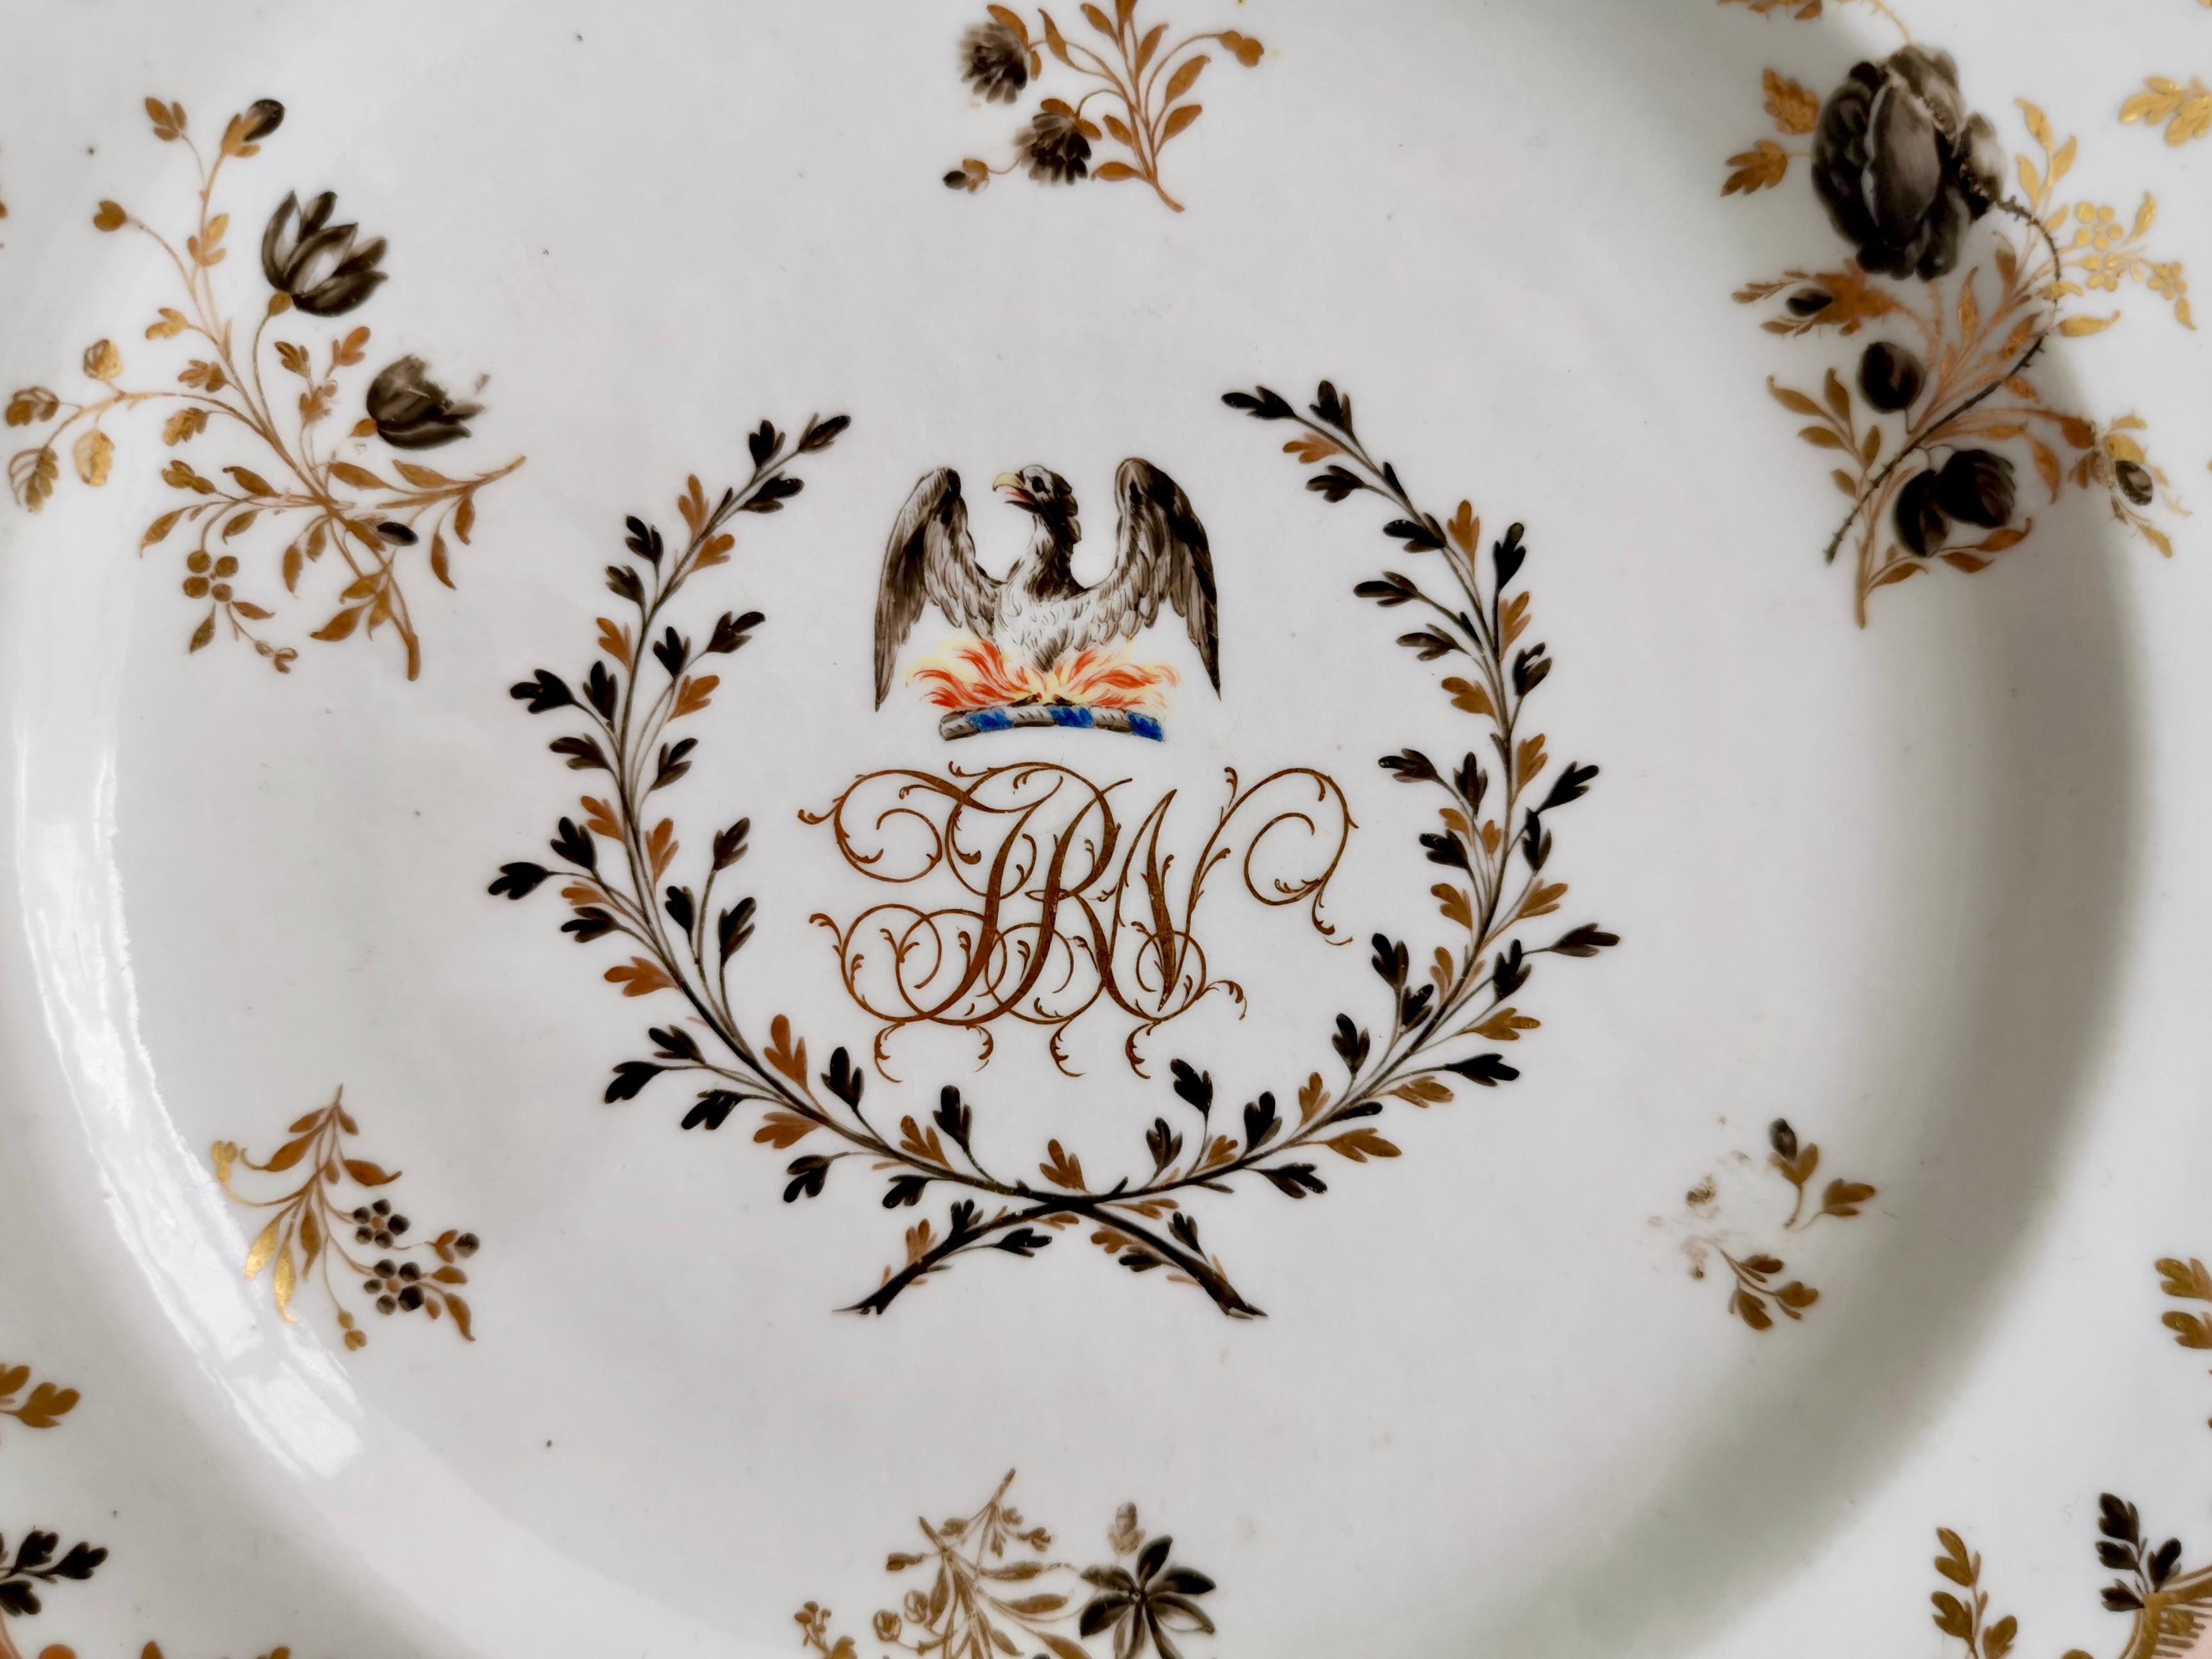 This is a wonderful set of two dessert plates made by Chamberlain Worcester between 1794 and 1811. 

The Chamberlain factory was founded in the 1780s by Robert Chamberlain, who was responsible for the decoration department in the famous Worcester